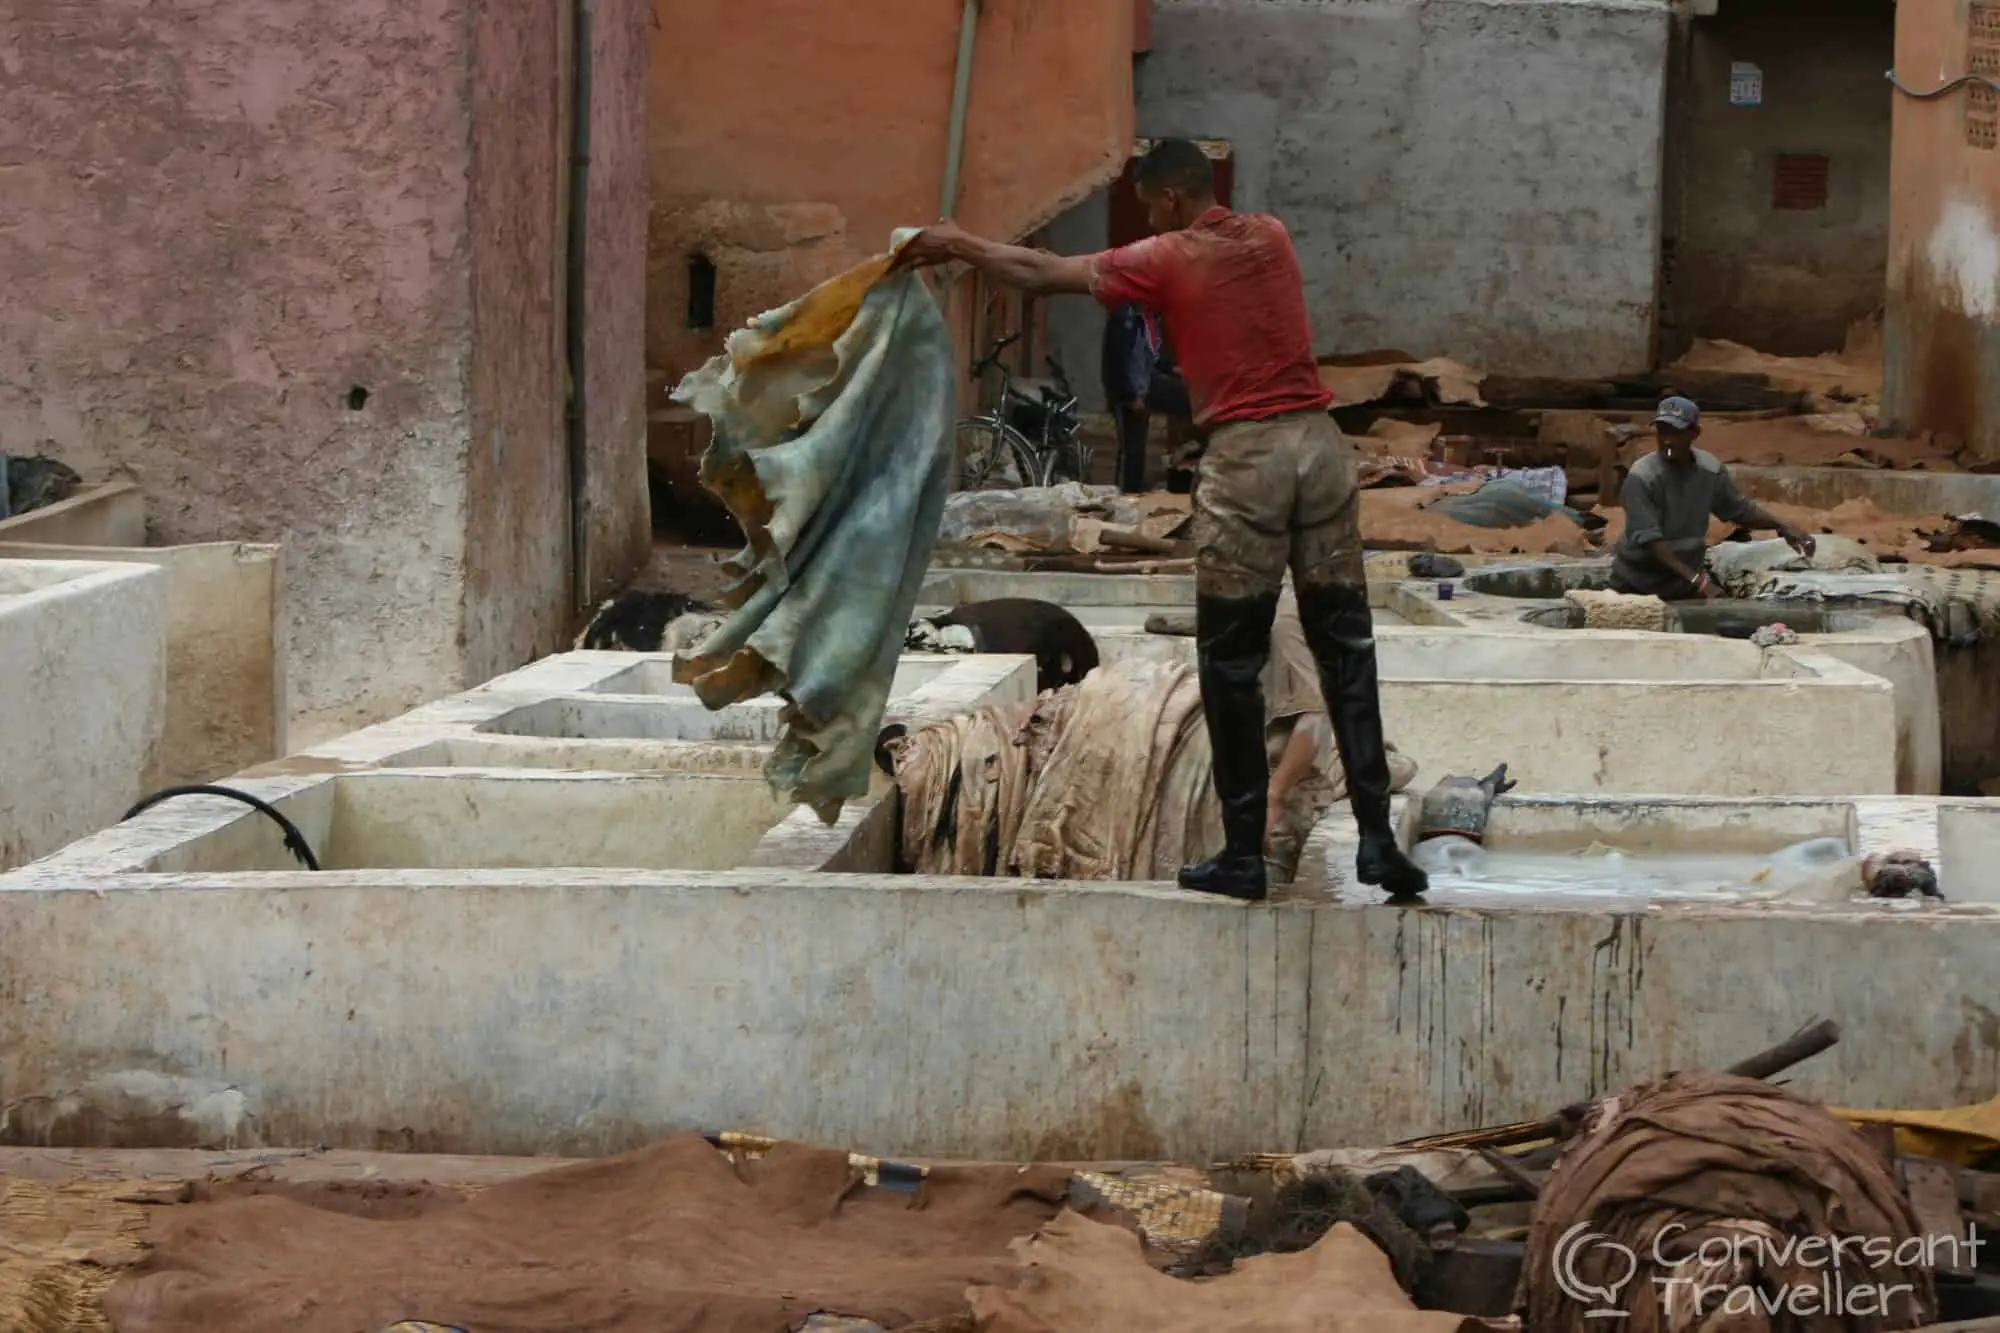 Working hard in the tanneries, Marrakech